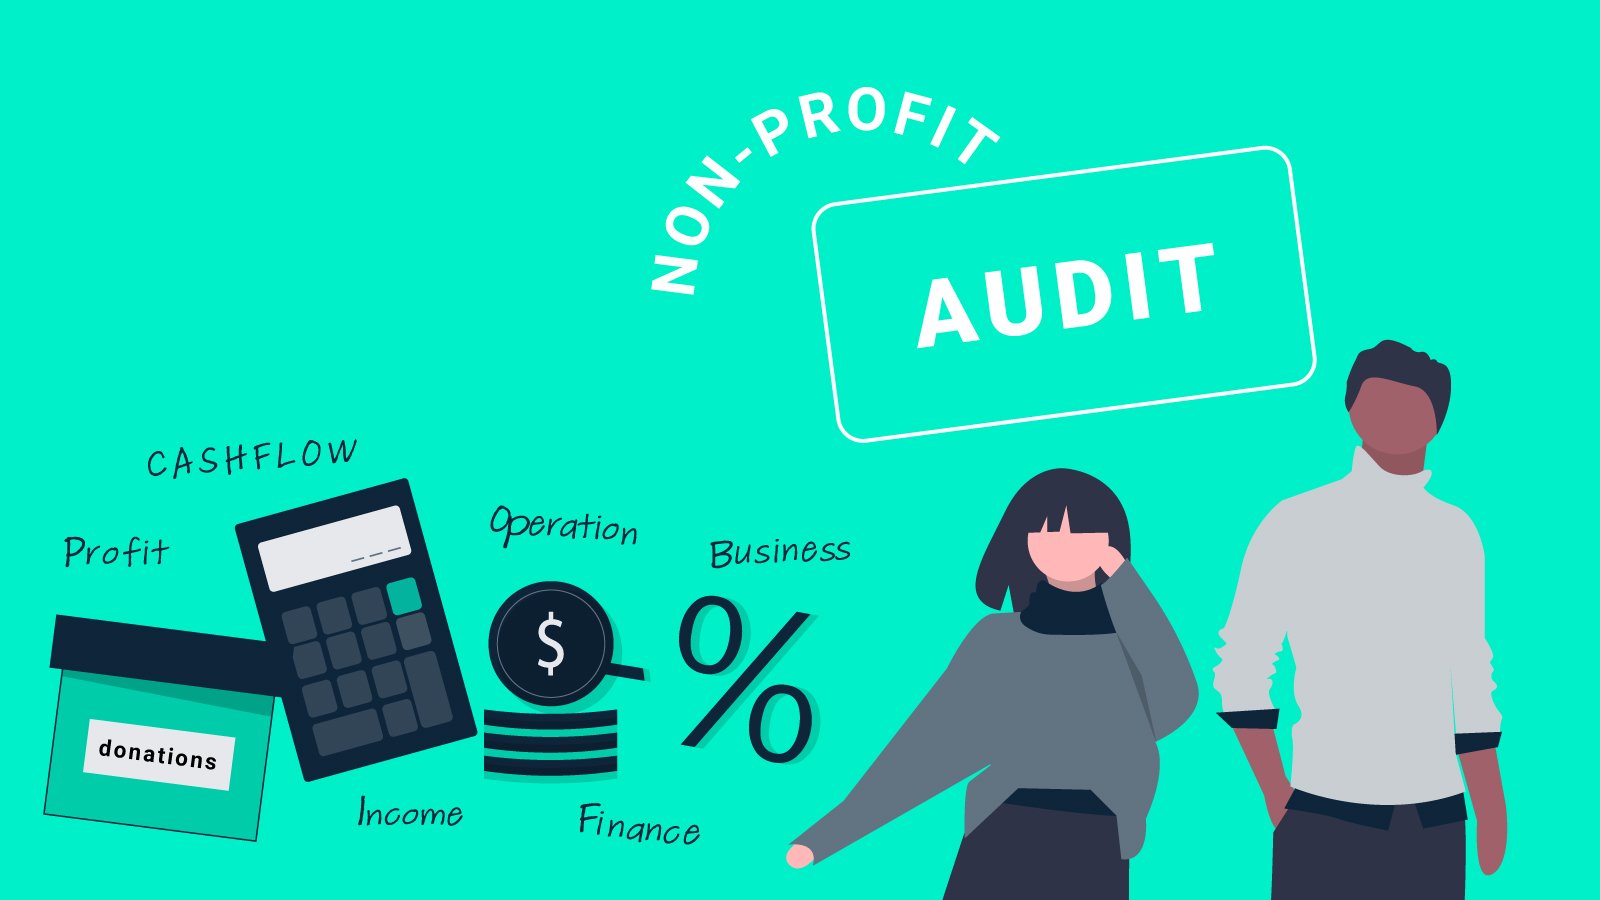 How to Make Audits Easier at Your Not-for-Profit Organisation